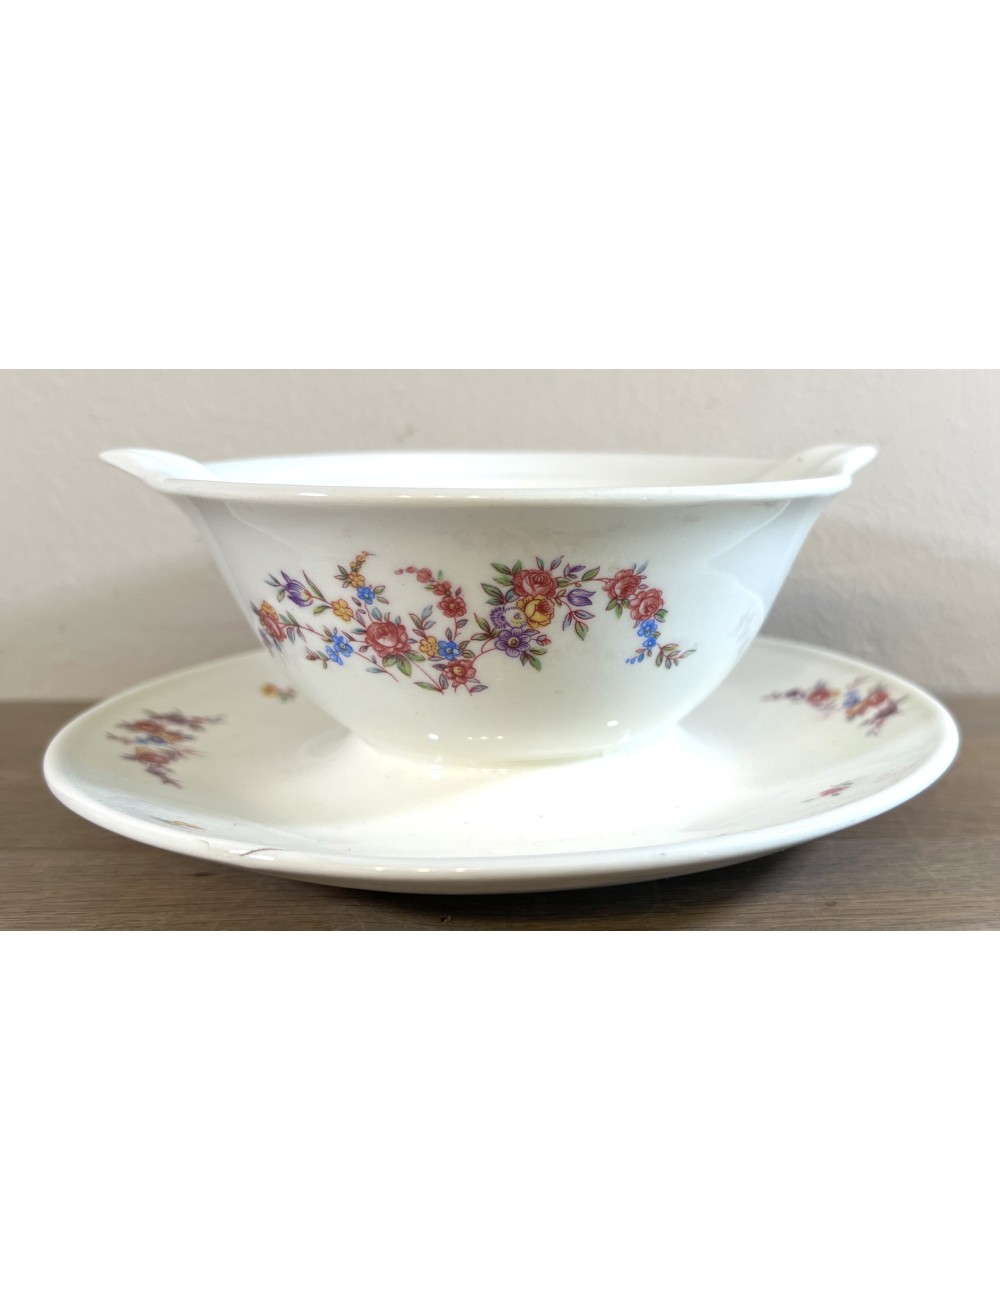 Gravy boat / Sauce boat - round model with two spouts - Petrus Regout - décor of kind of scattered flowers